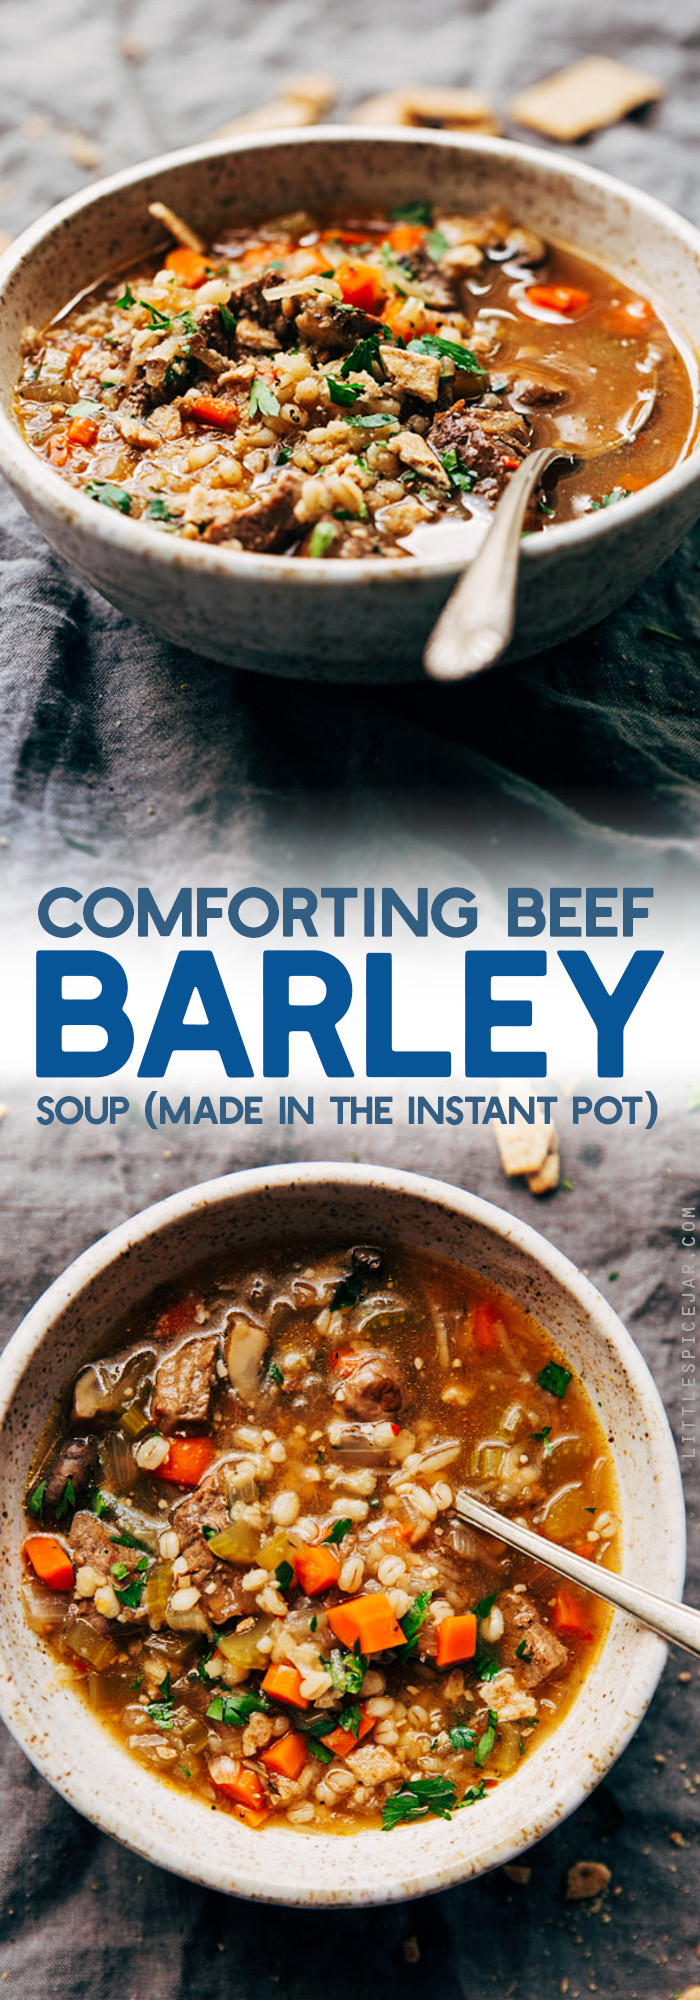 Beef Soup Instant Pot
 forting Beef Barley Soup Instant Pot Recipe